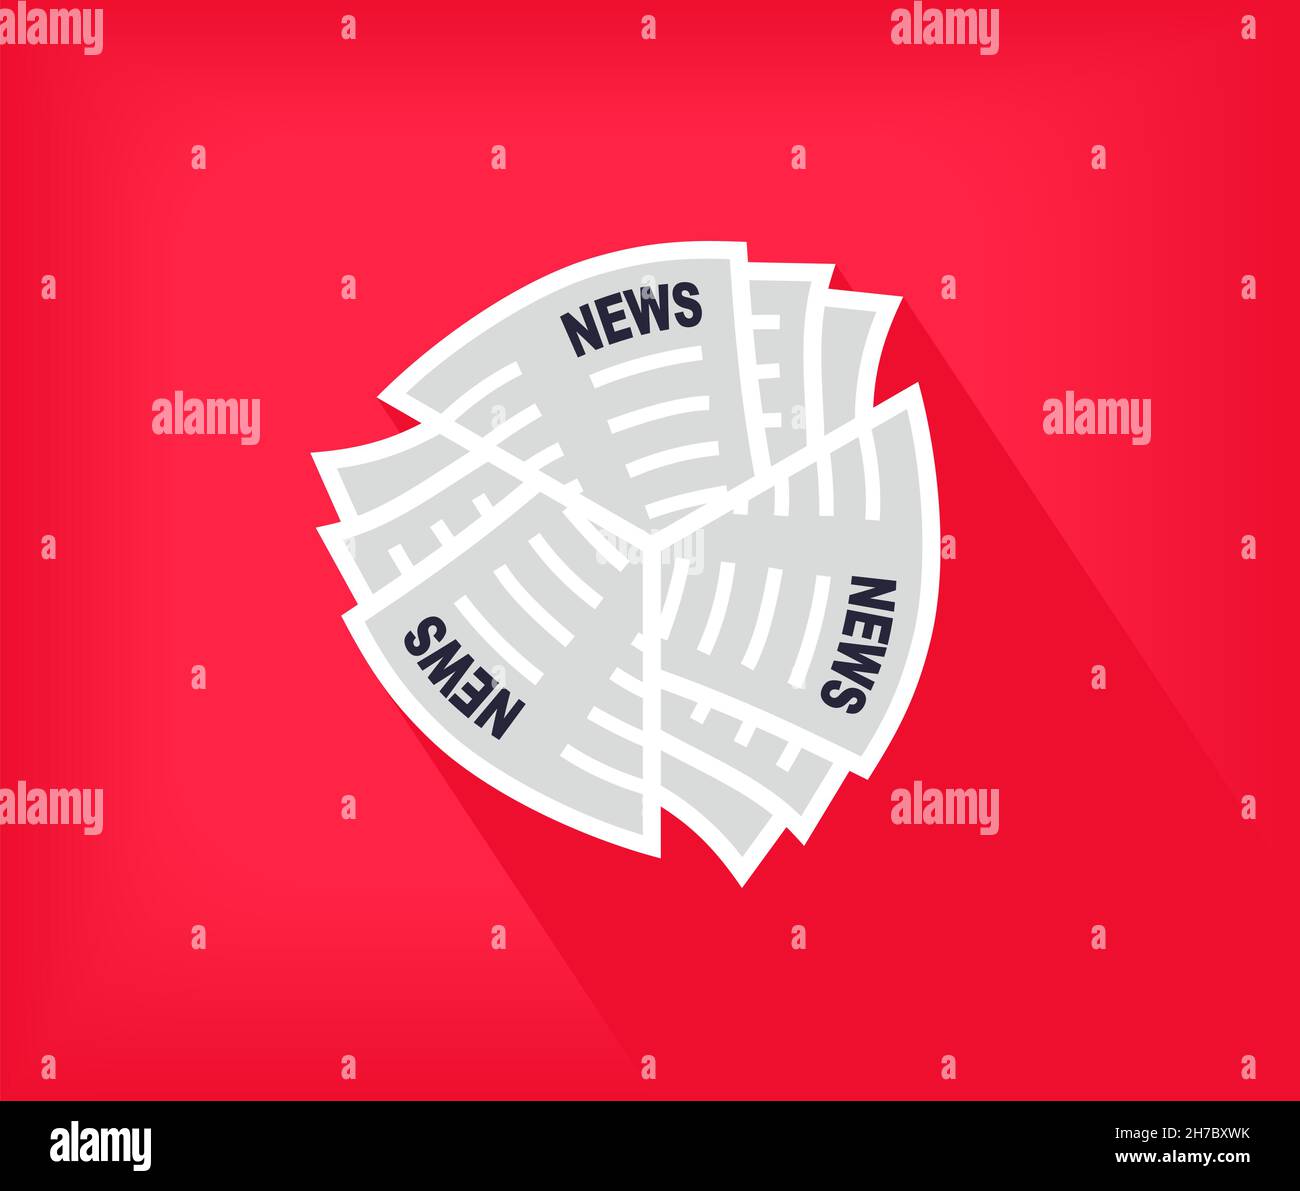 Emblem design for news. Newspapers. Simple flat icon. Vector template Stock Vector